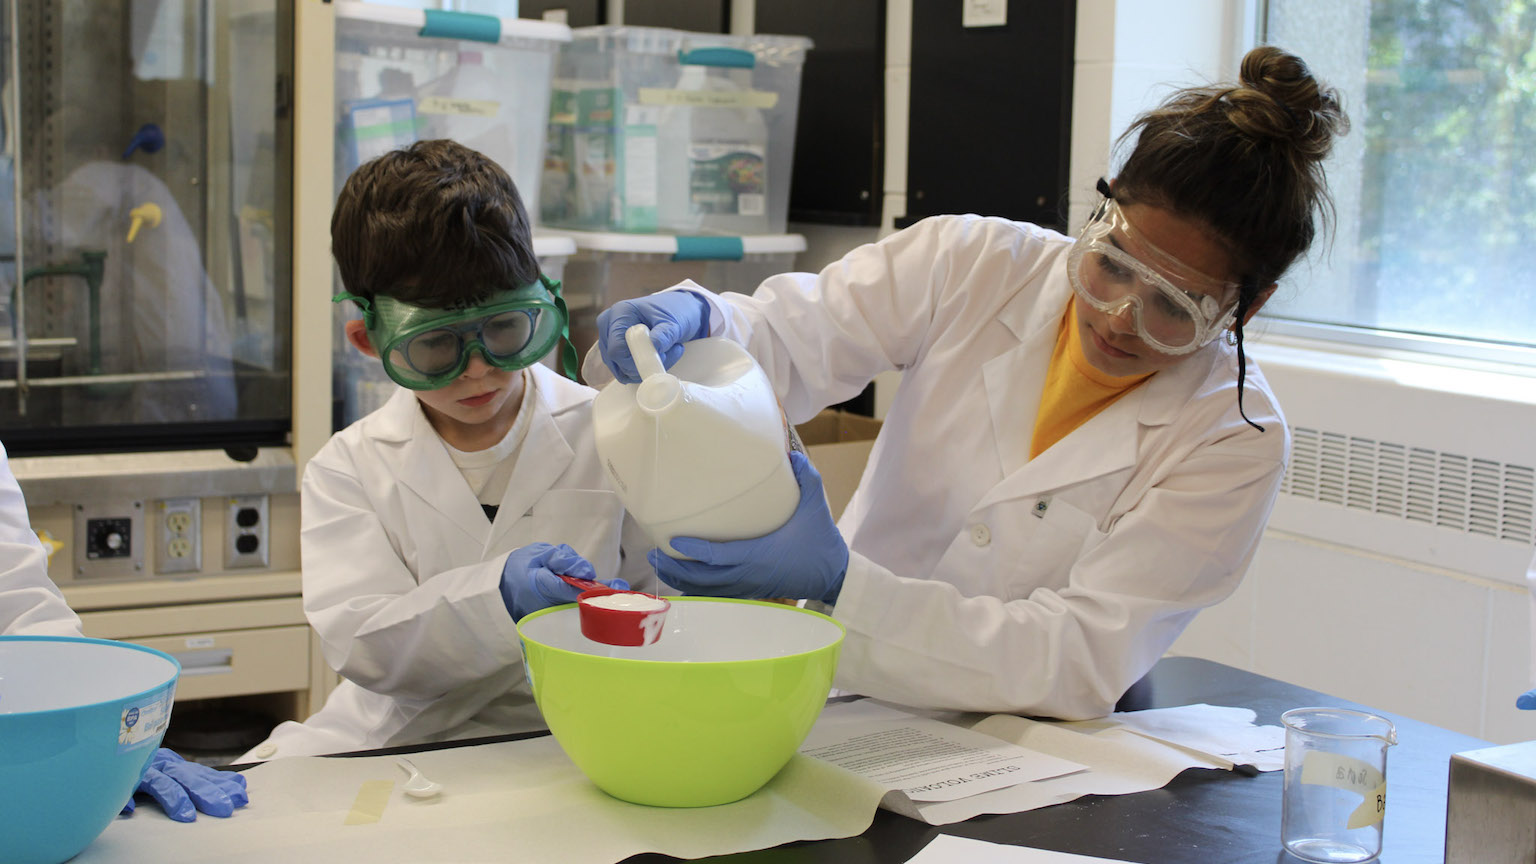 a young student and a camp instructor working on a science experiment in a lab. They are both wearing safety goggles and lab coats.